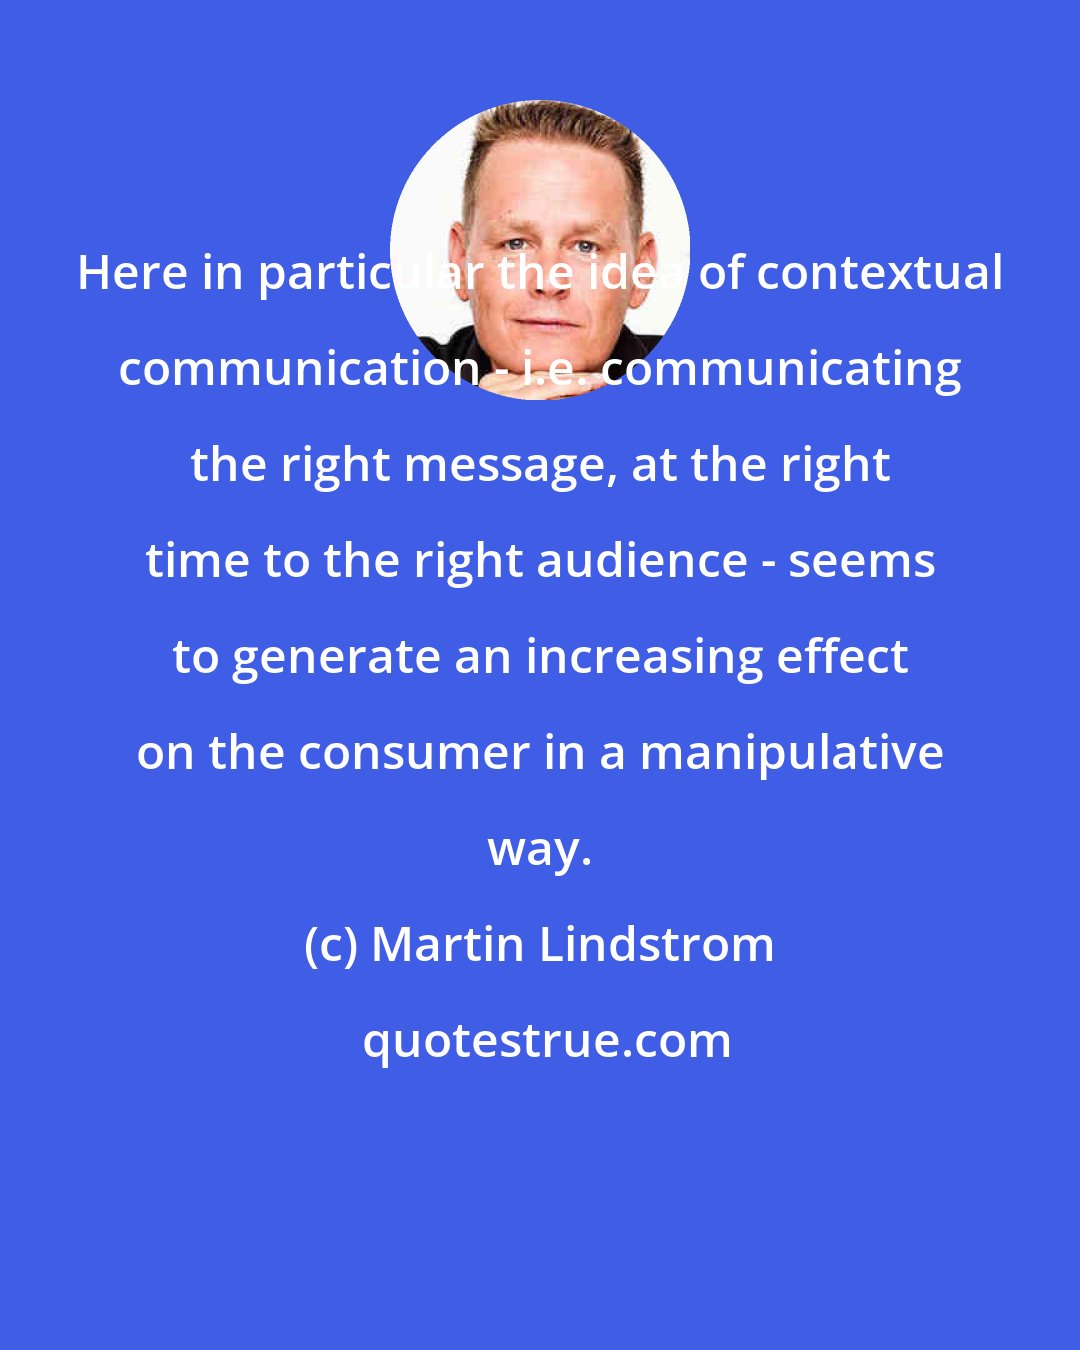 Martin Lindstrom: Here in particular the idea of contextual communication - i.e. communicating the right message, at the right time to the right audience - seems to generate an increasing effect on the consumer in a manipulative way.